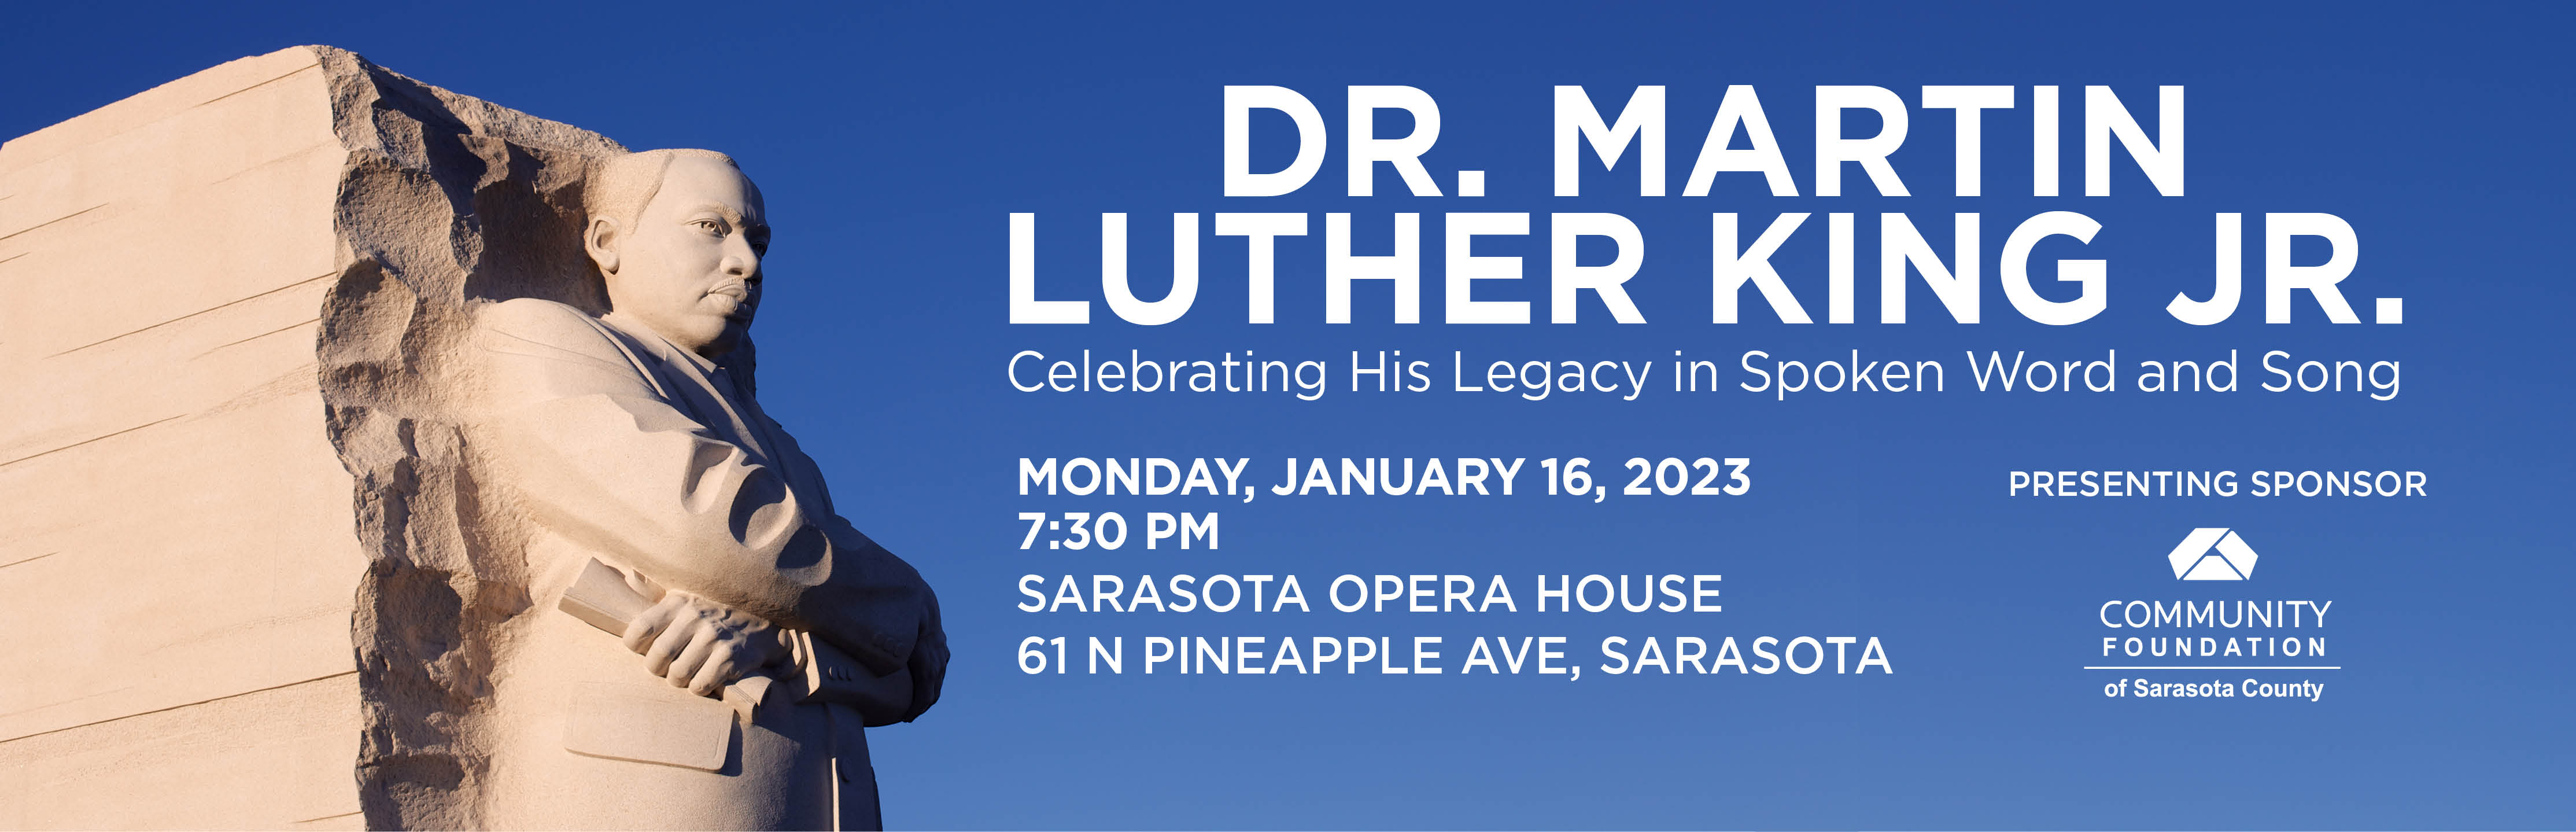 Dr. Martin Luther King Jr.: Celebrating His Legacy in Spoken Word and Song; Monday, Jan. 16. 2023 at the Sarasota Opera House